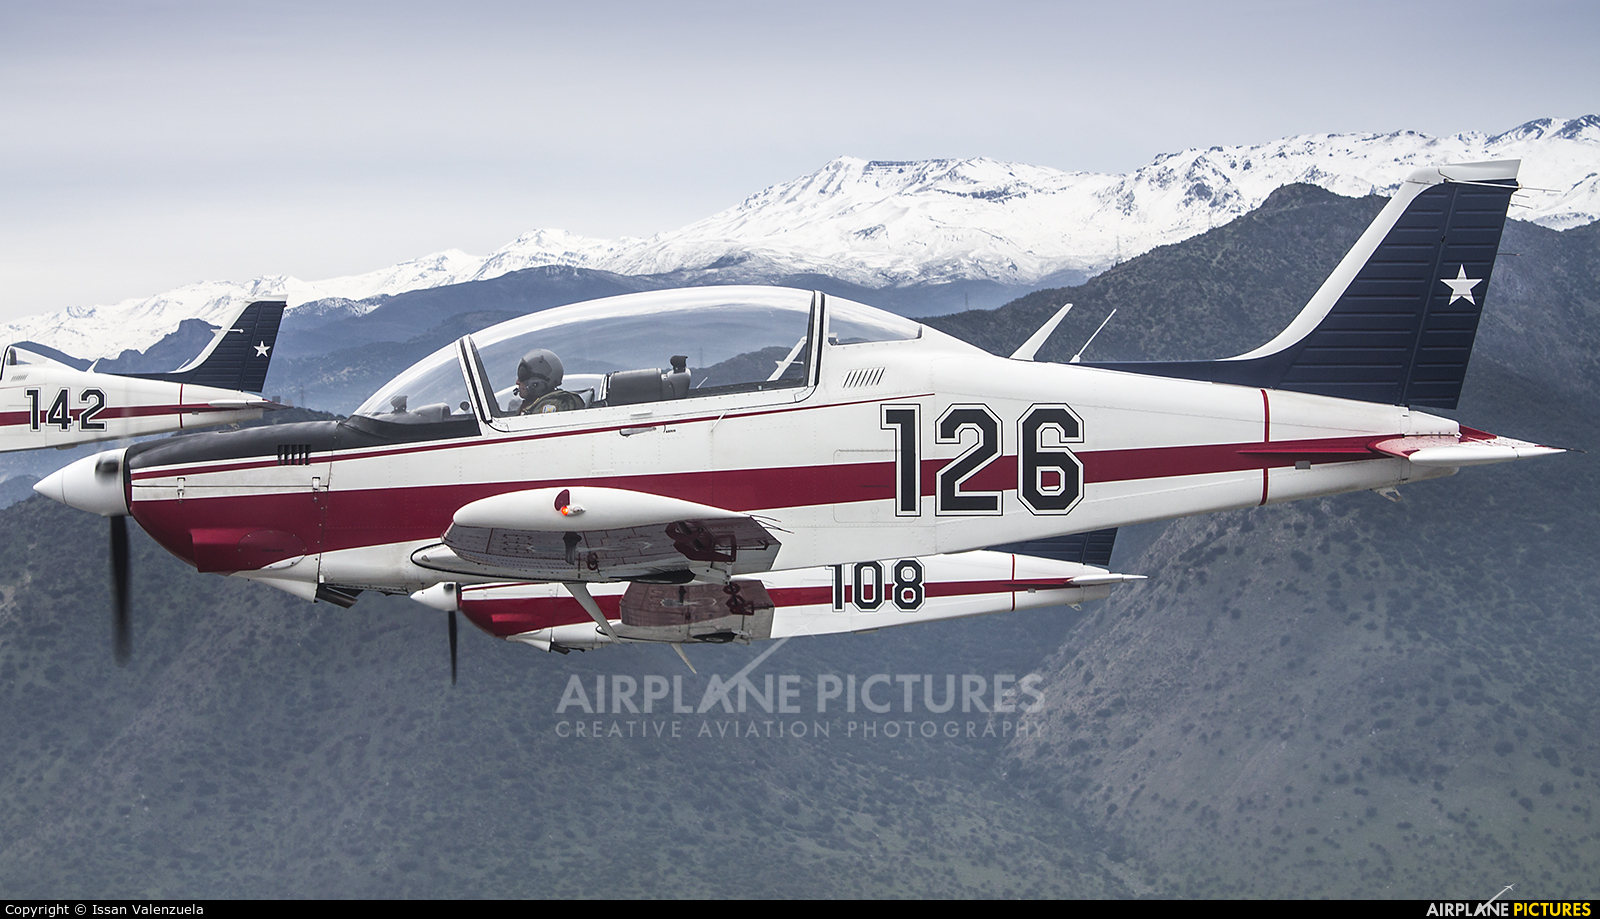 Chile - Air Force 126 aircraft at In Flight - Chile